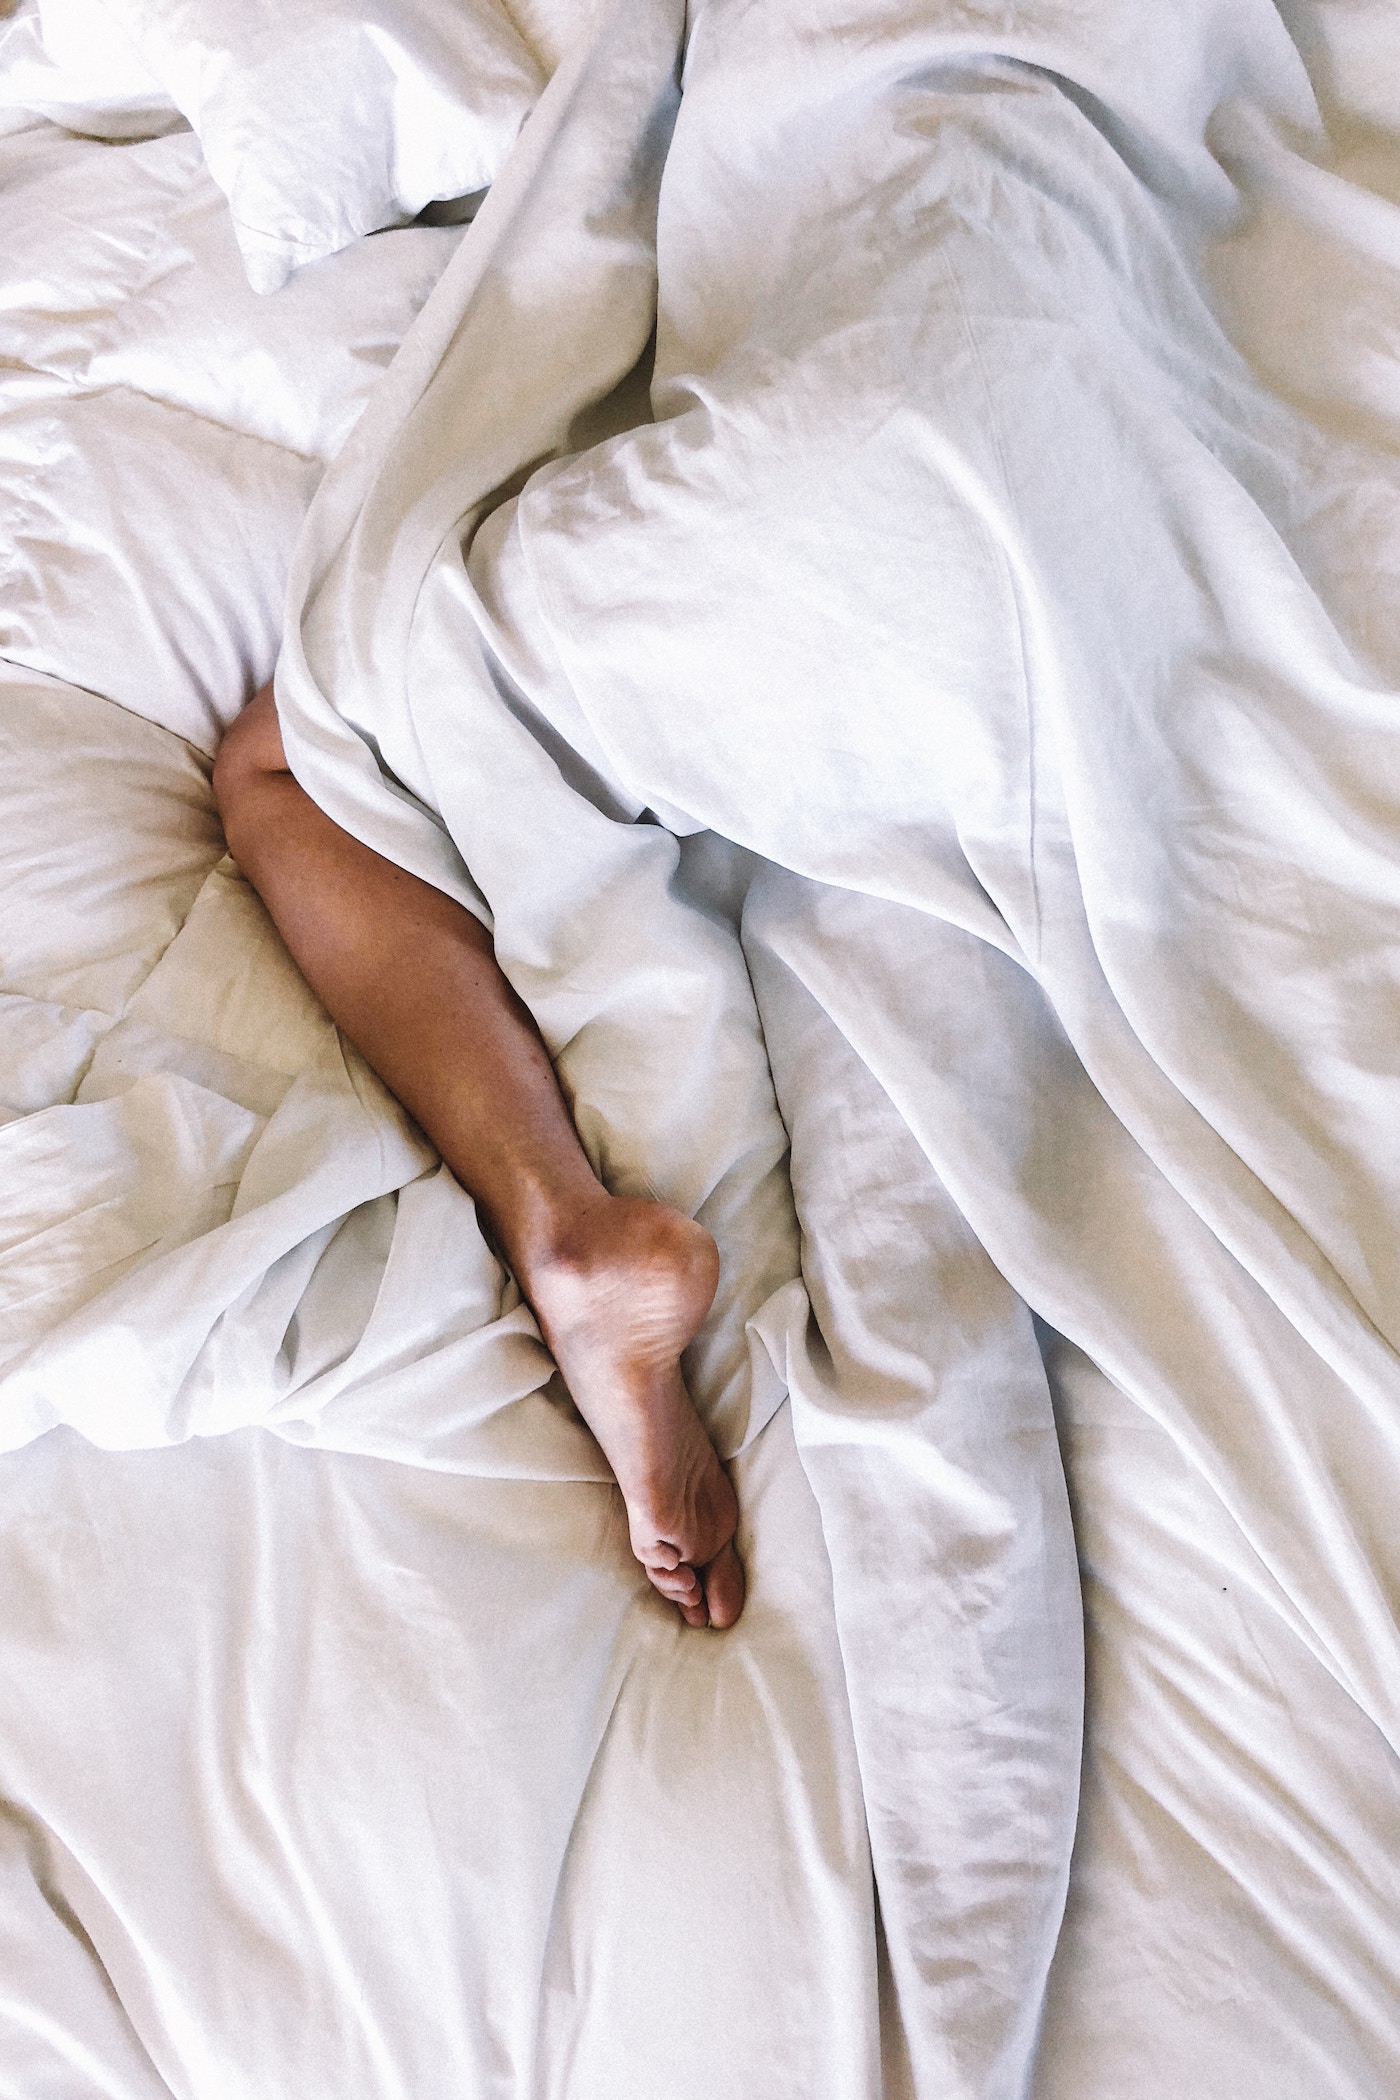 how to sleep with a partner who sweats too much